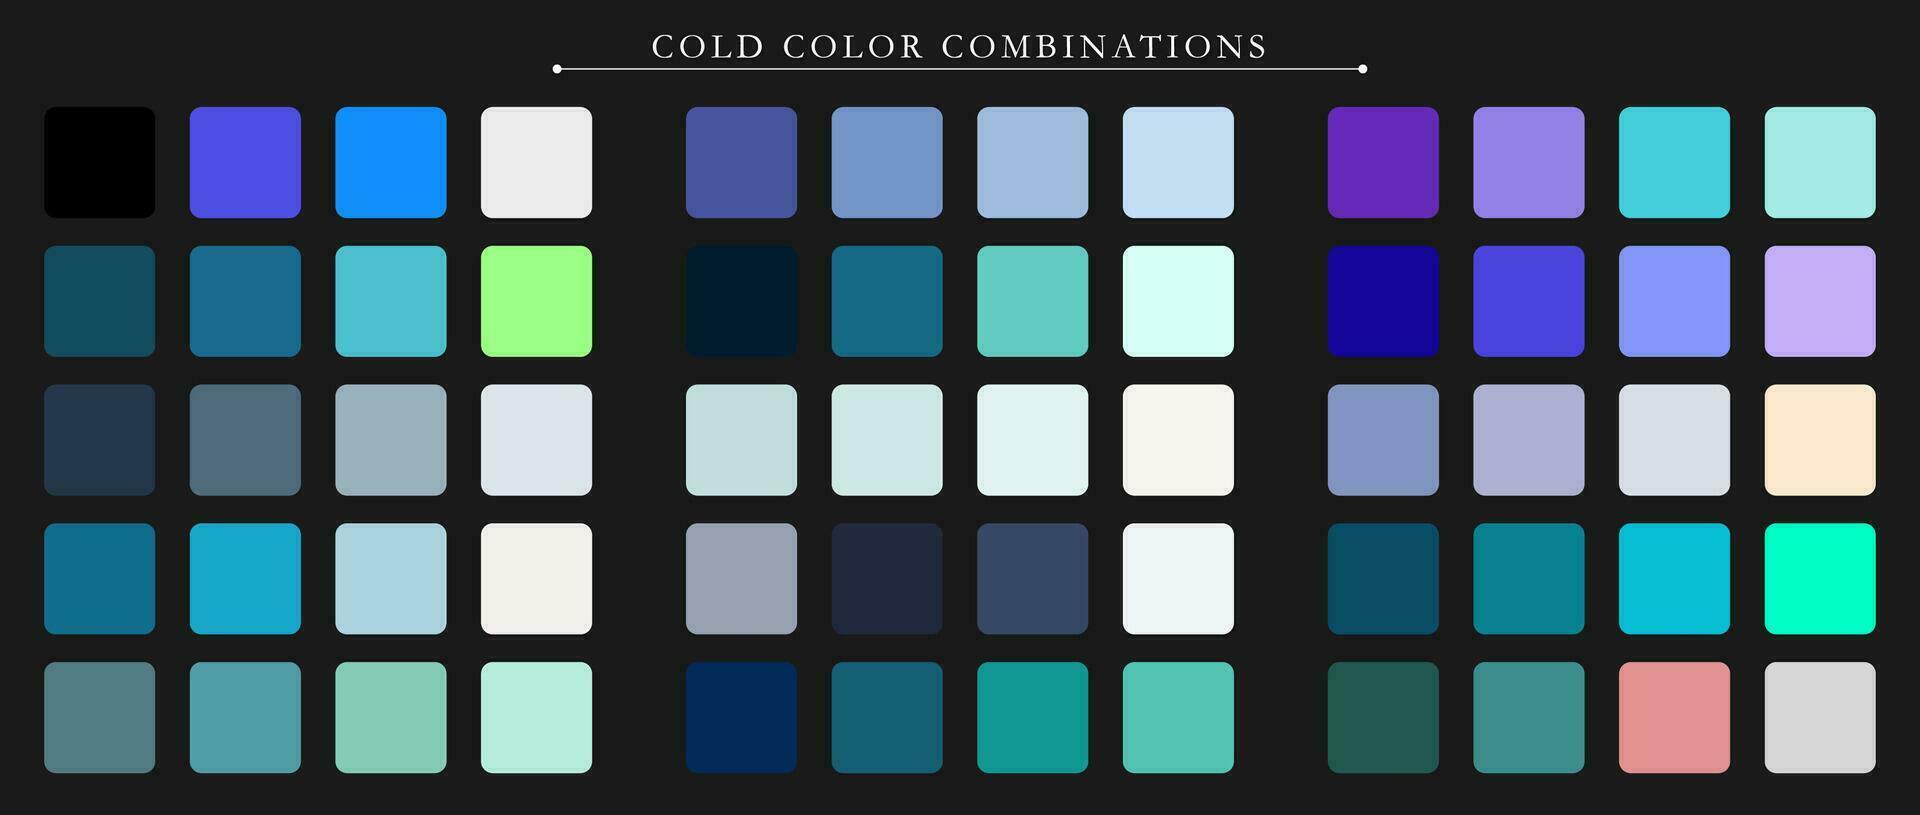 Cold palette. Trend color pallete guide template. An example of a color palette. Forecast of the future color trend. Match color combinations. Vector graphics. Eps 10.